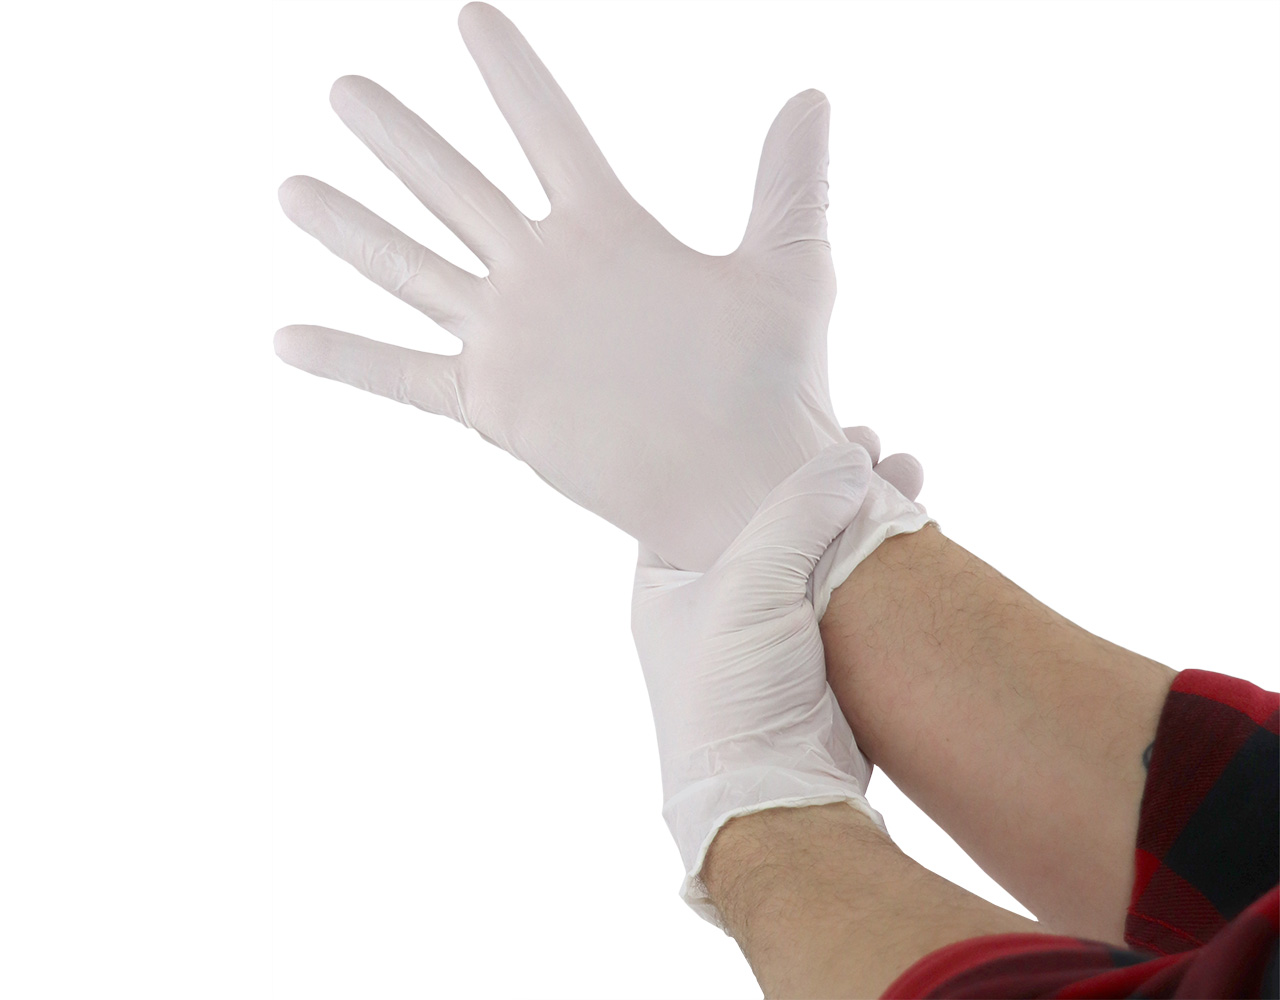 Picture for Mad Farmer White Nitrile Horticulture Gloves, Size XL, Box of 100